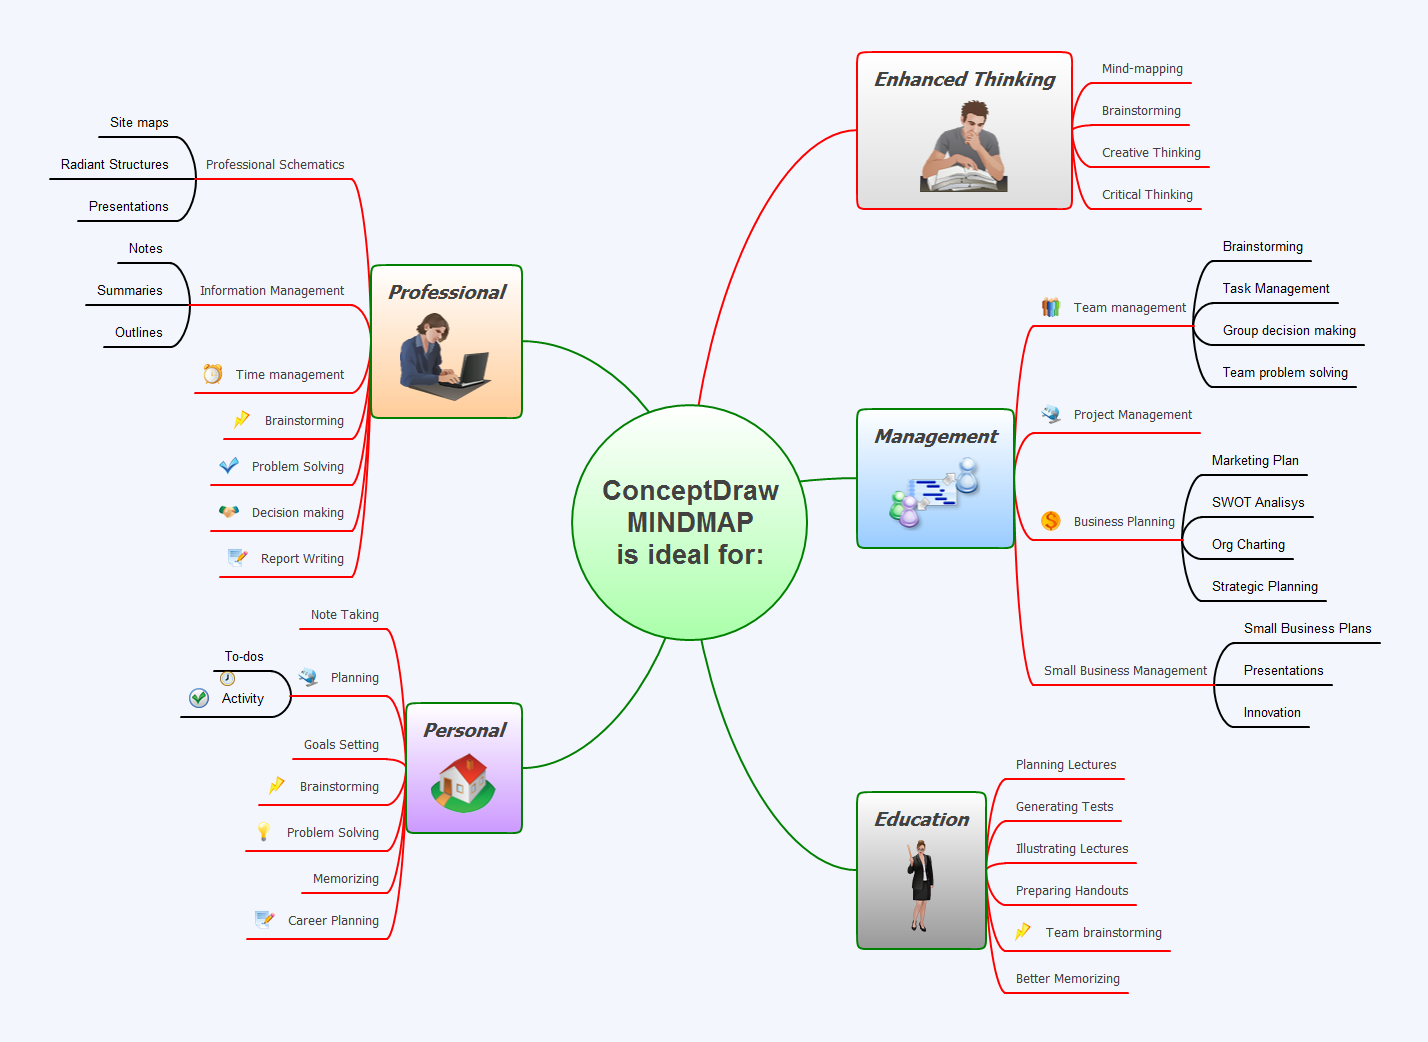 Concept Draw Office 10.0.0.0 + MINDMAP 15.0.0.275 instal the new for windows